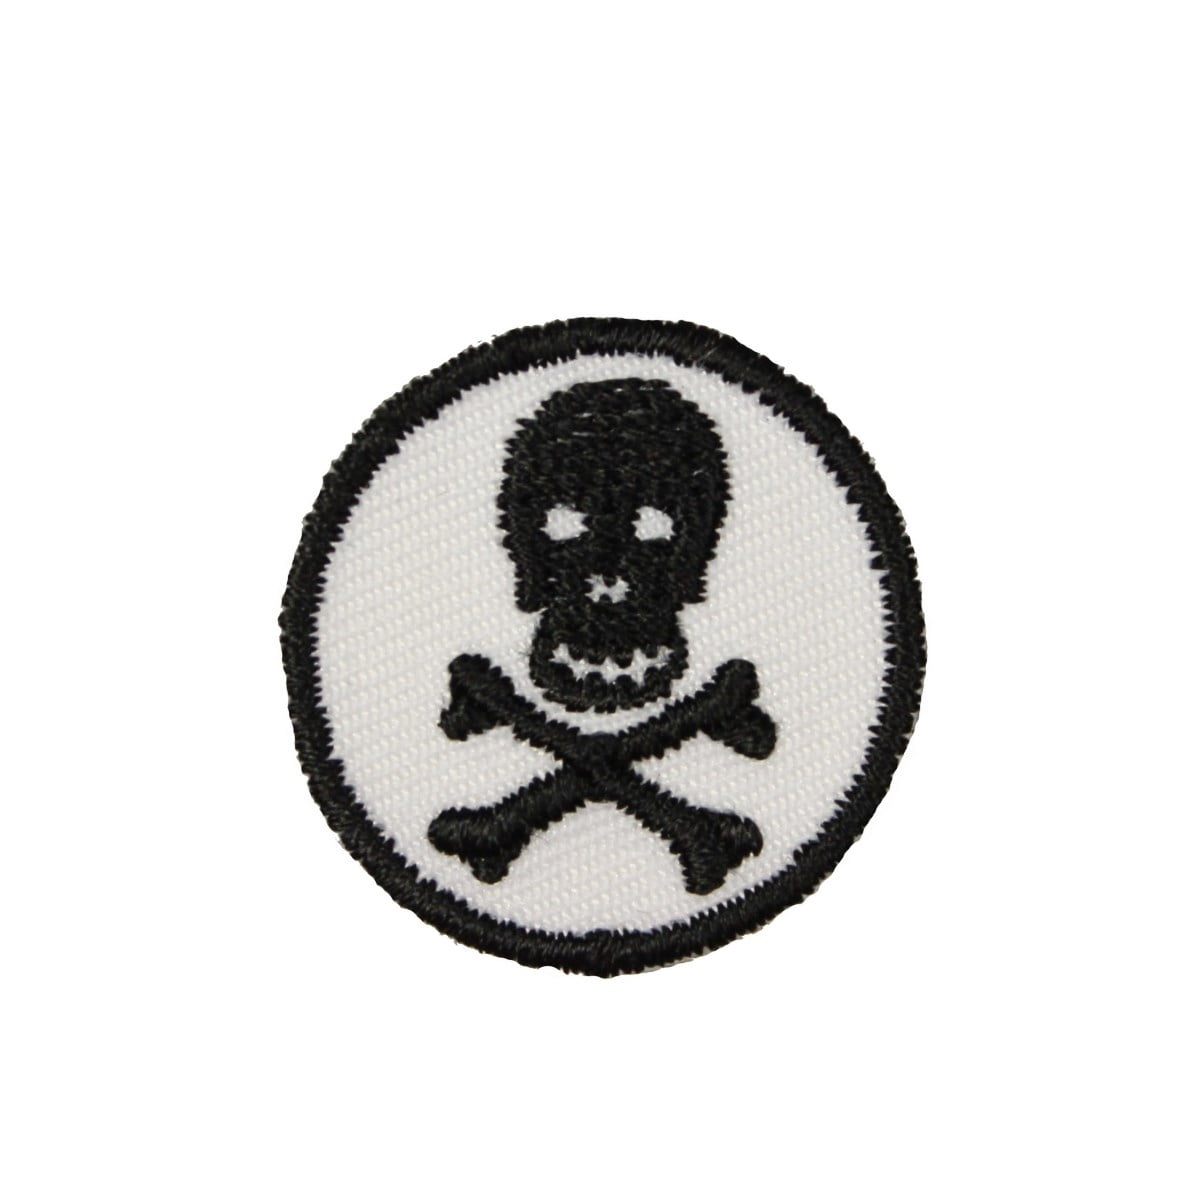 Skull Crossbones Camouflage Patch Sew On Embroidered Iron on Patch